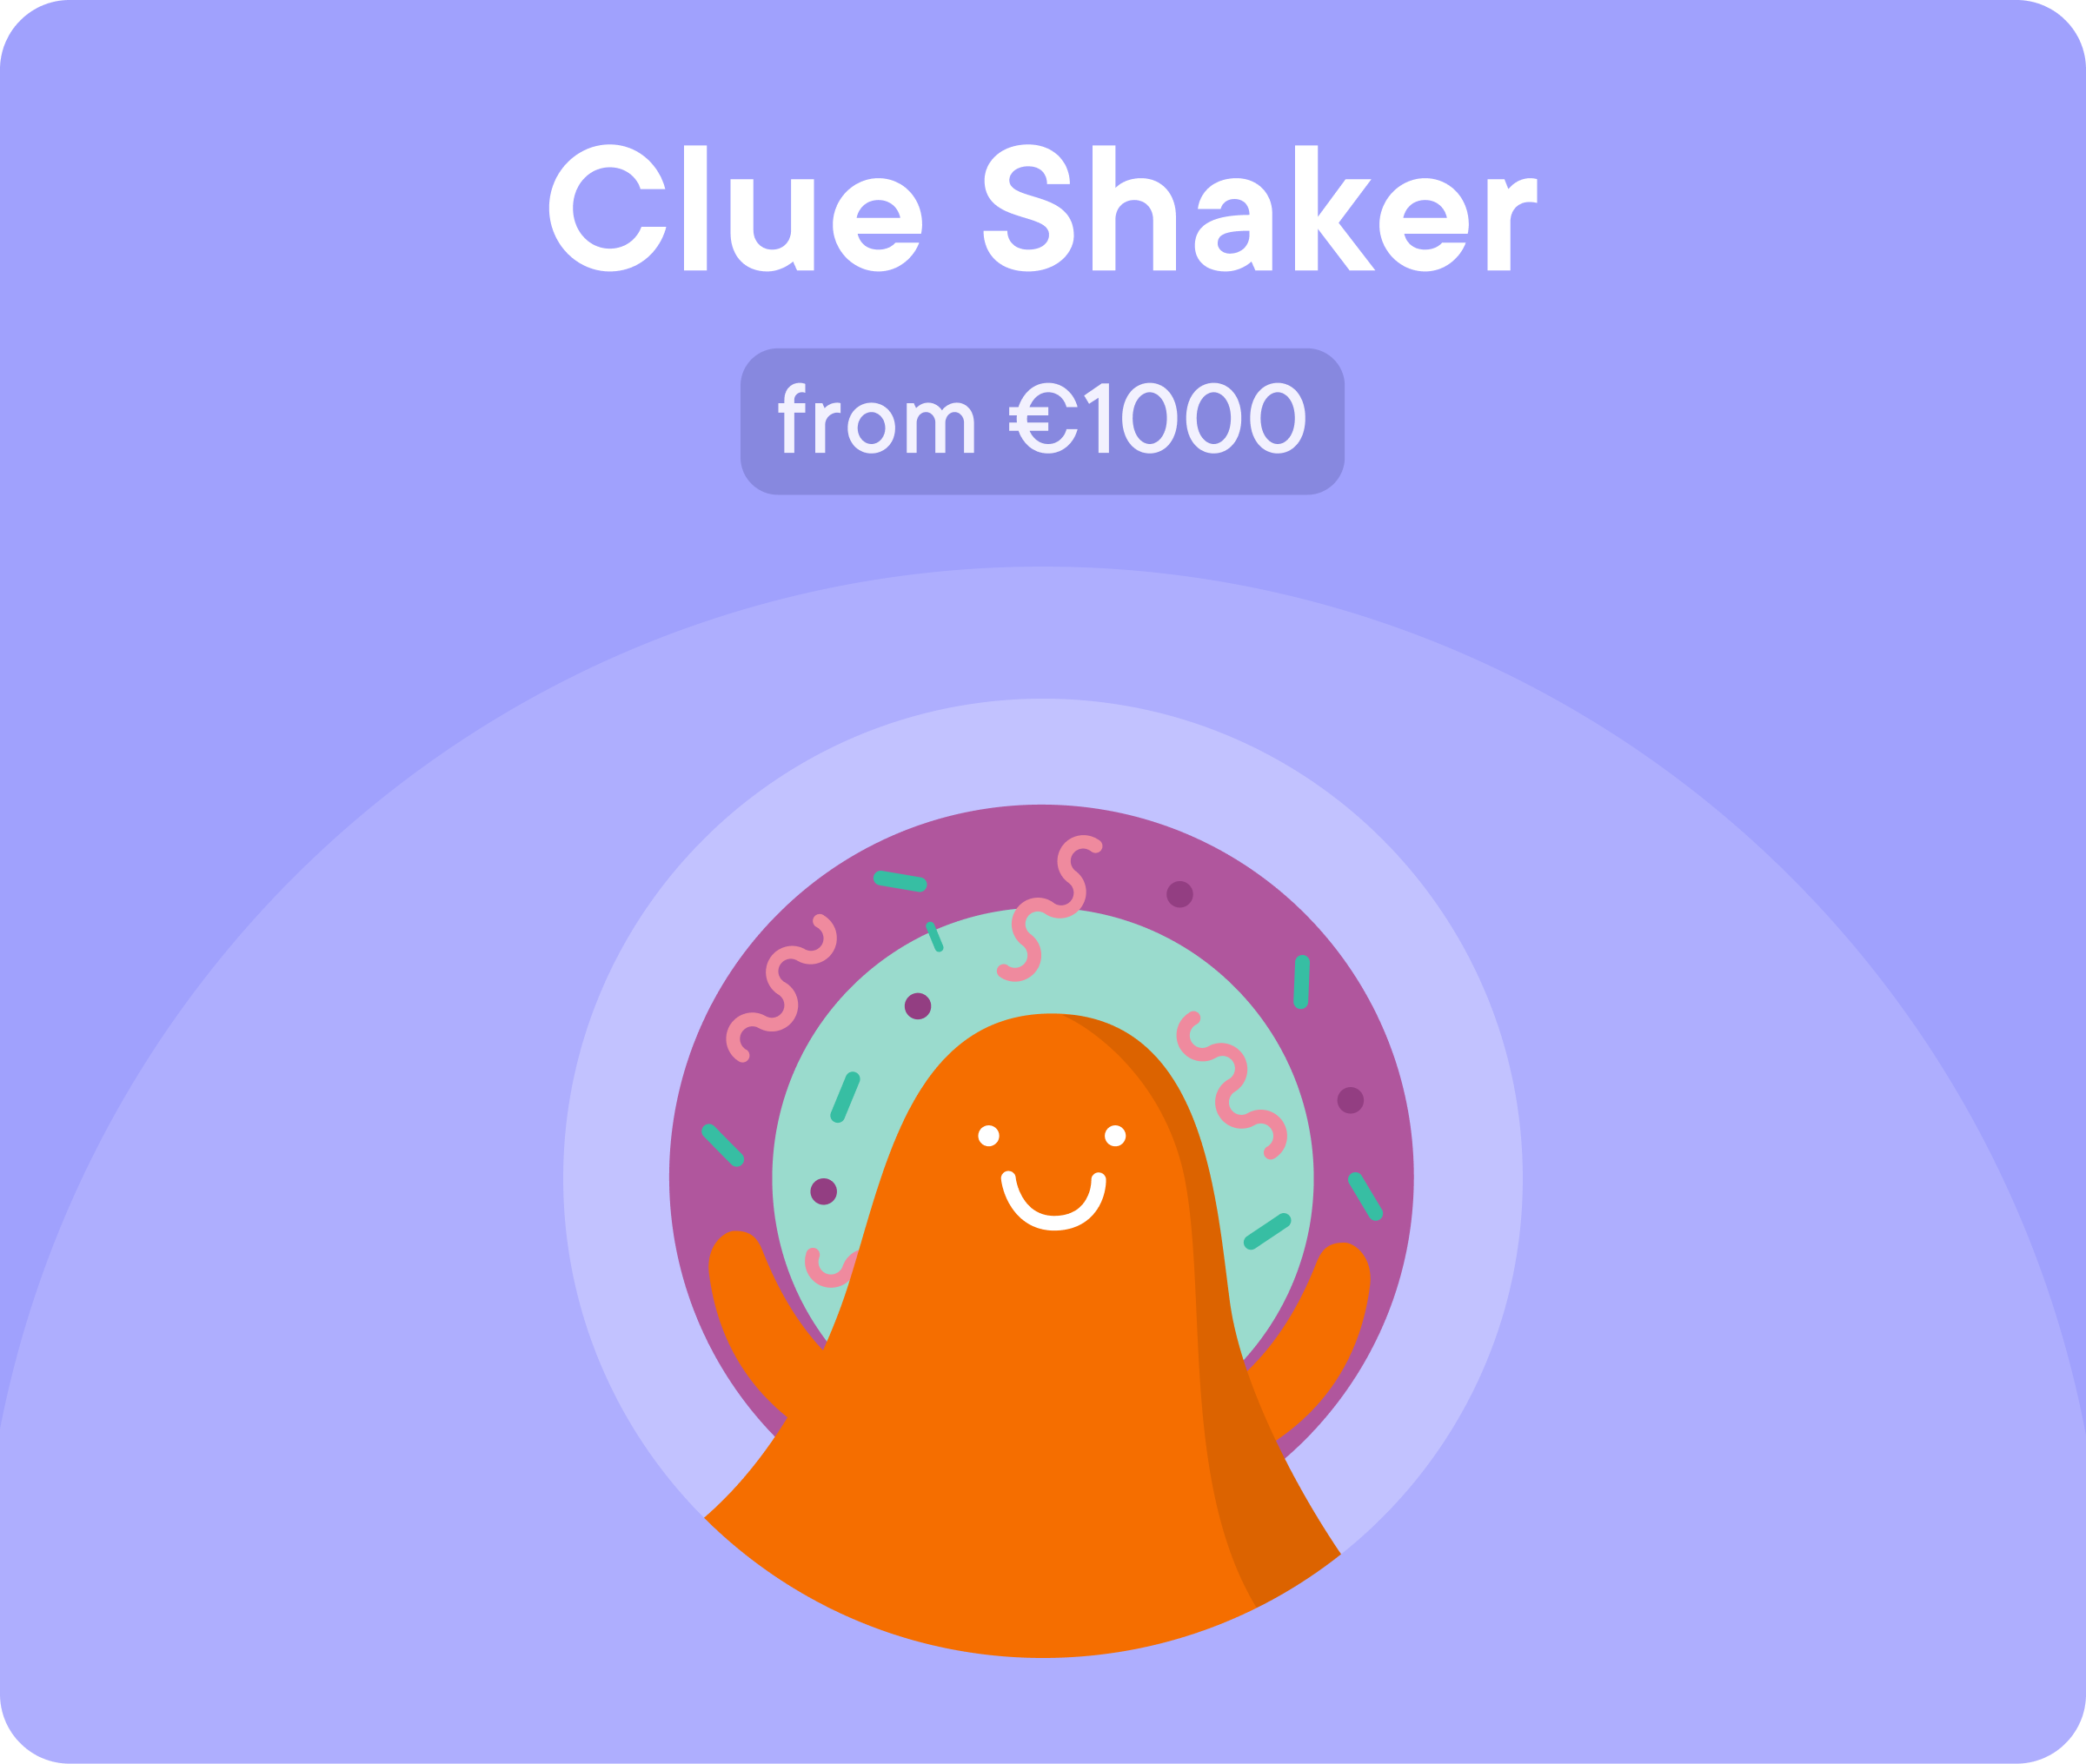 Clue Shaker from €1000